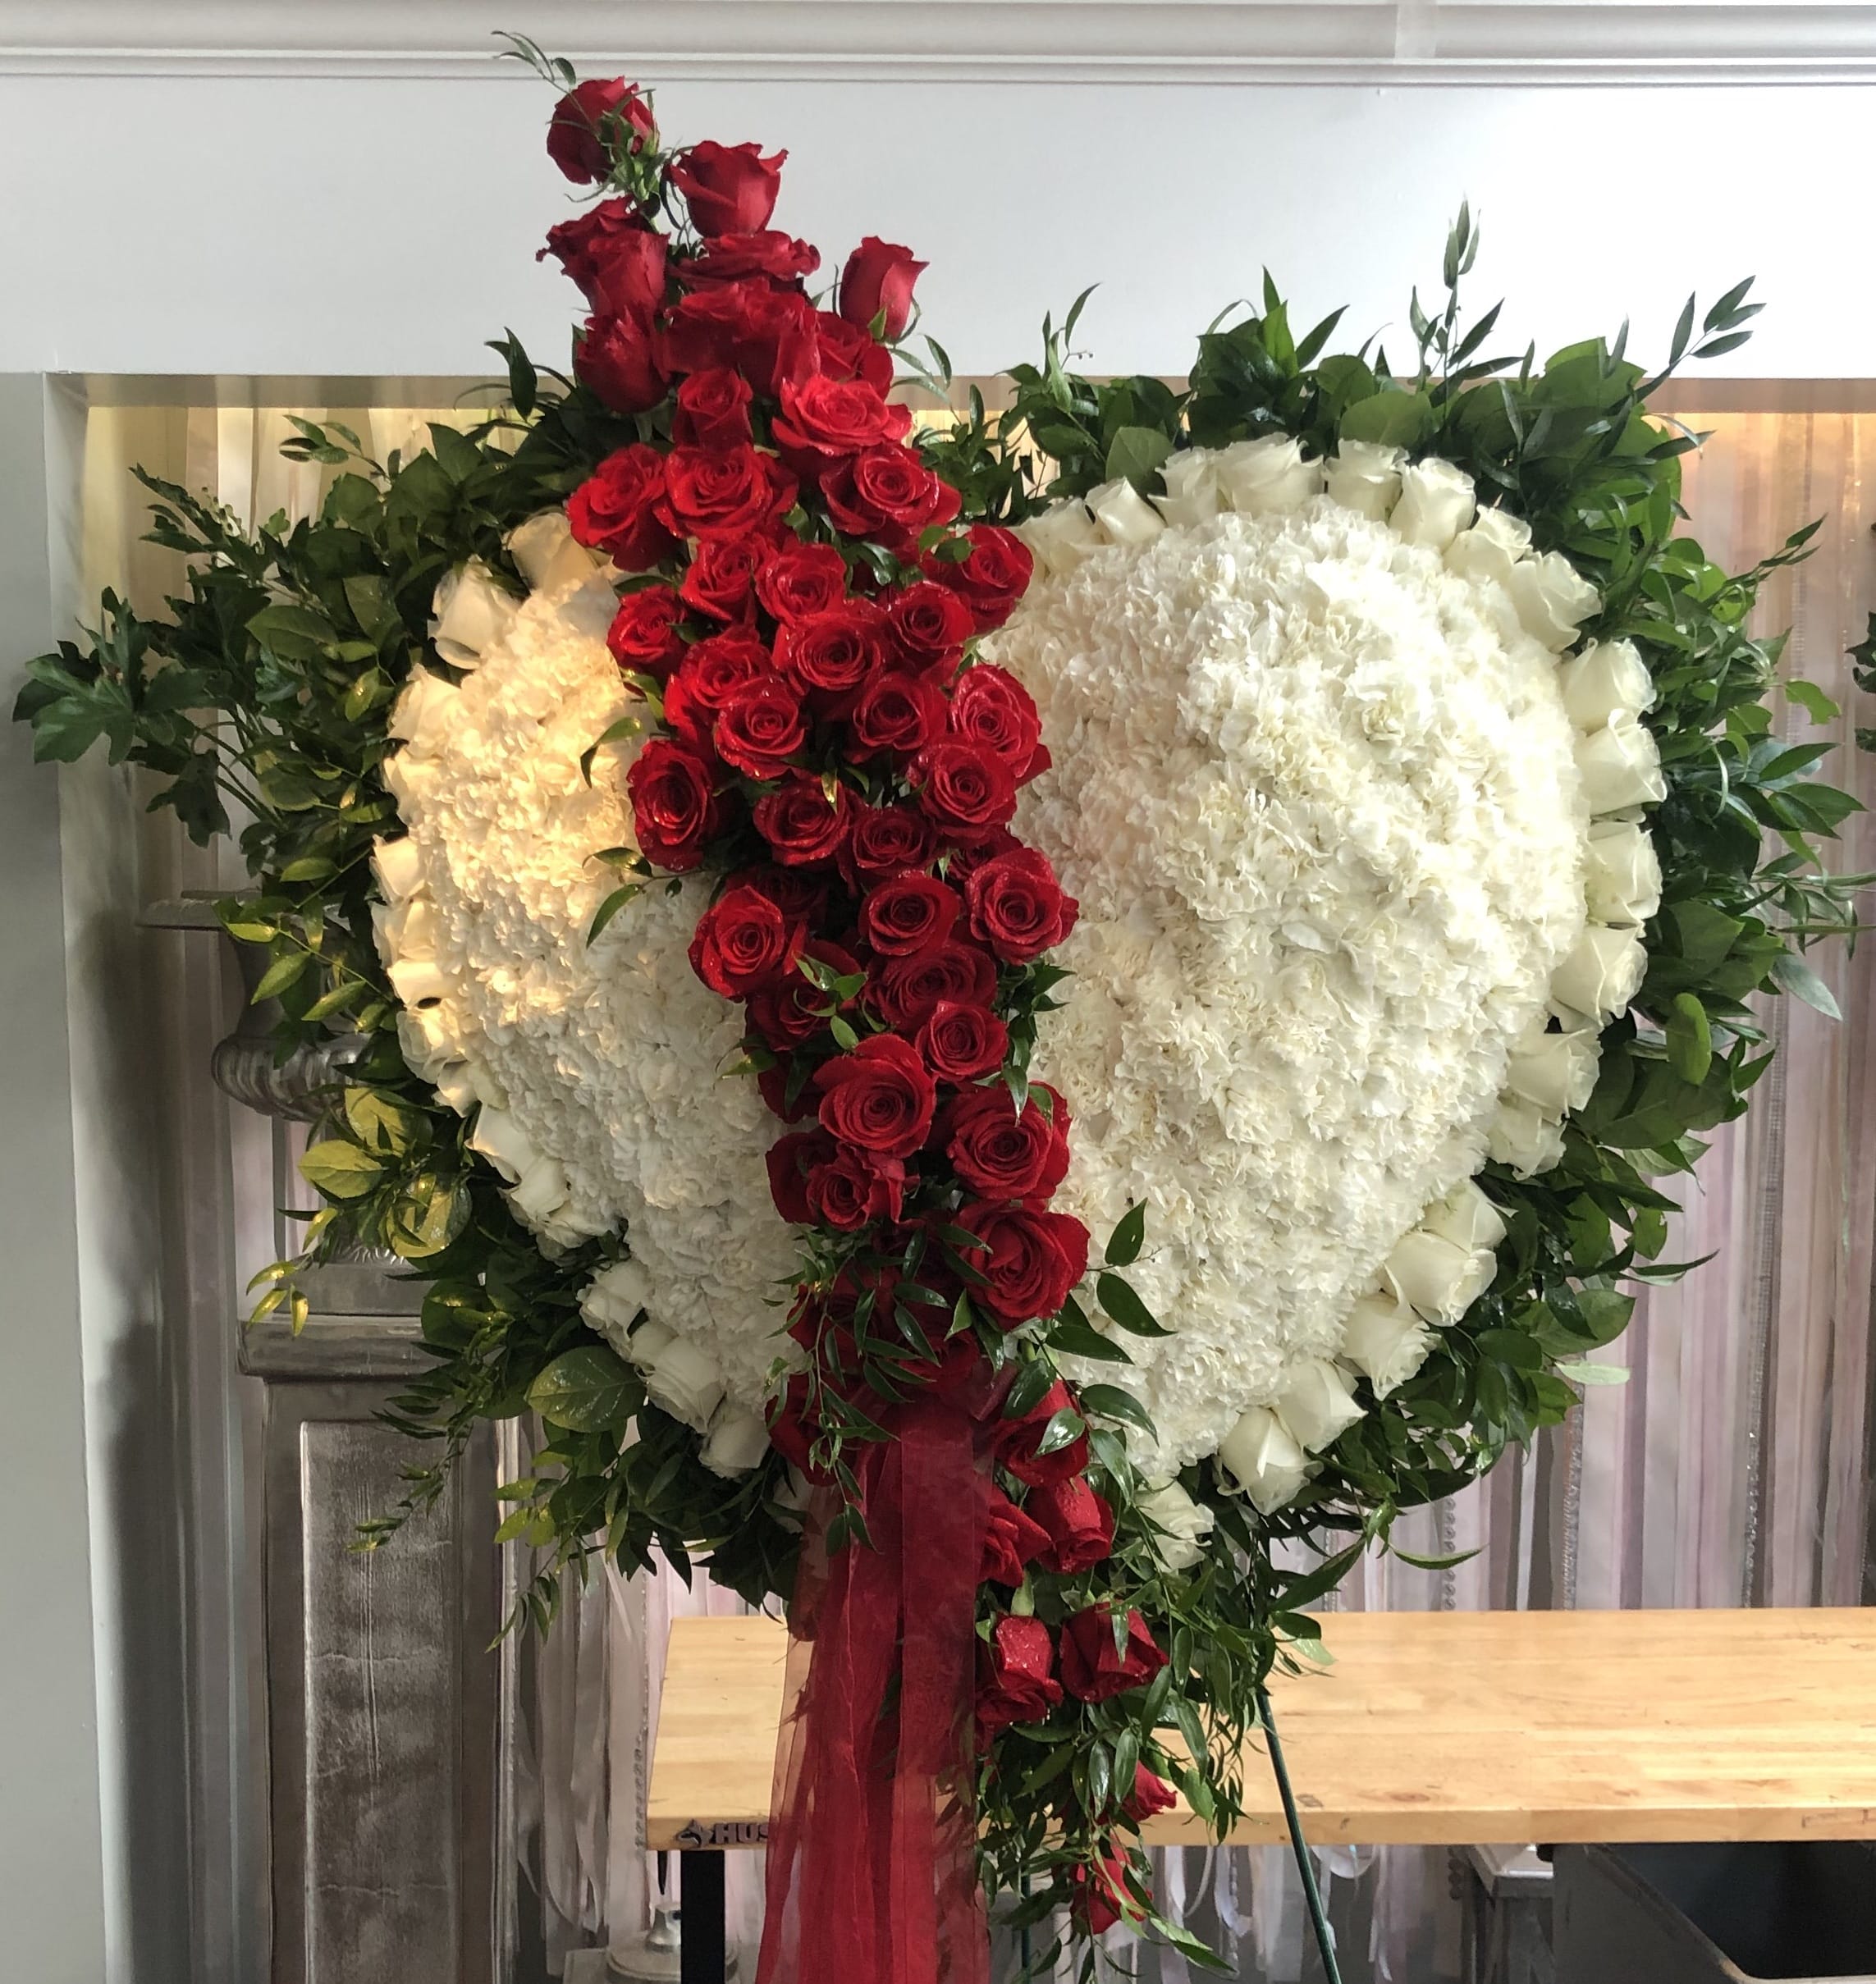 White Sympathy Heart with White Rose Border and Red Rose Break - The traditional bleeding heart is a beautiful display expressing your profound affection for your loved one. This large beveled heart is designed with white roses and a red rose border and break. 